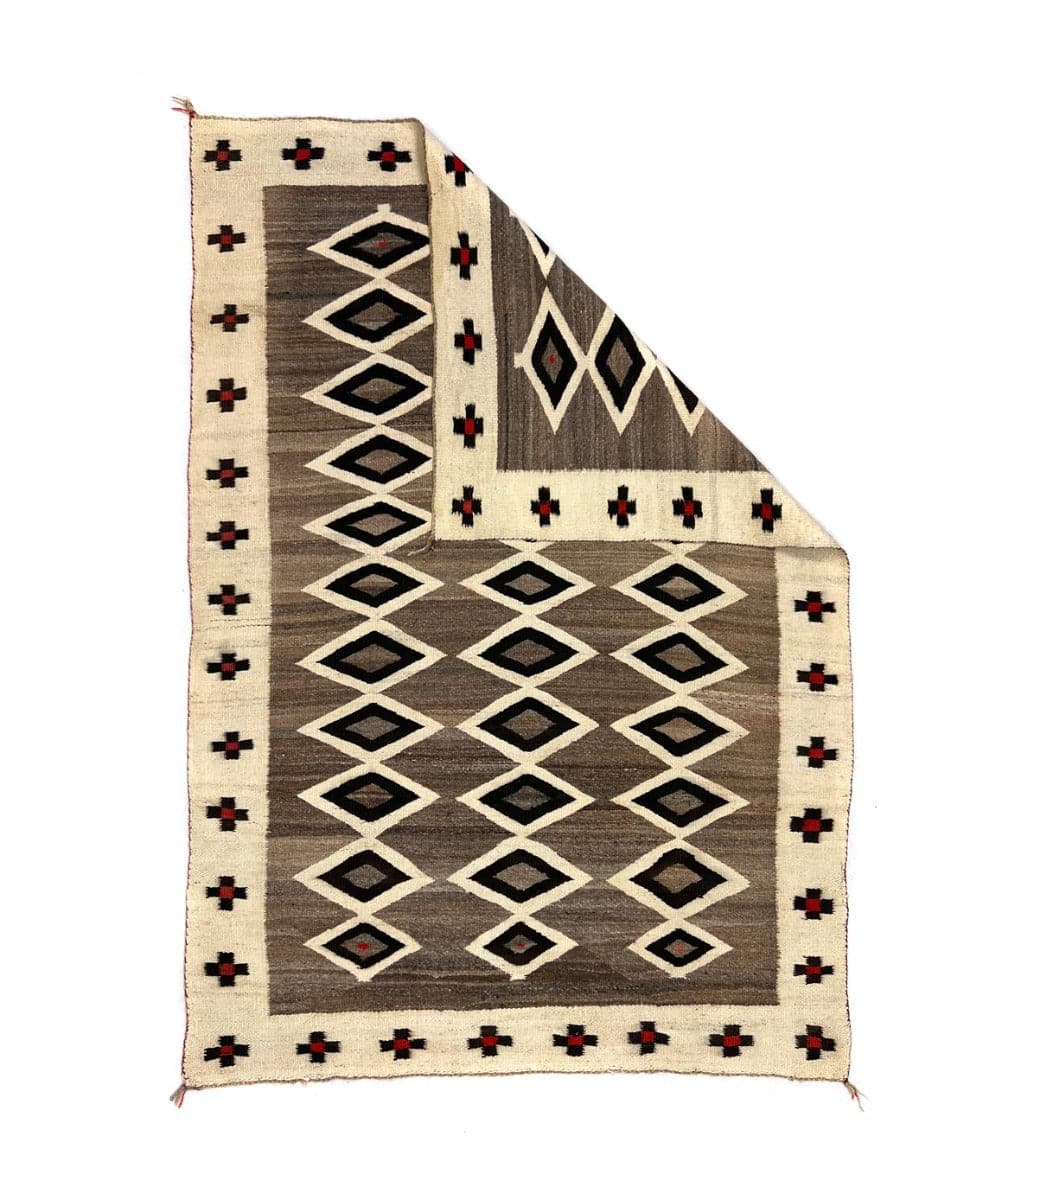 Navajo Crystal Rug with Cross Designs c. 1880-1893, 75.5" x 53.5" (T91654A-0422-005) 7